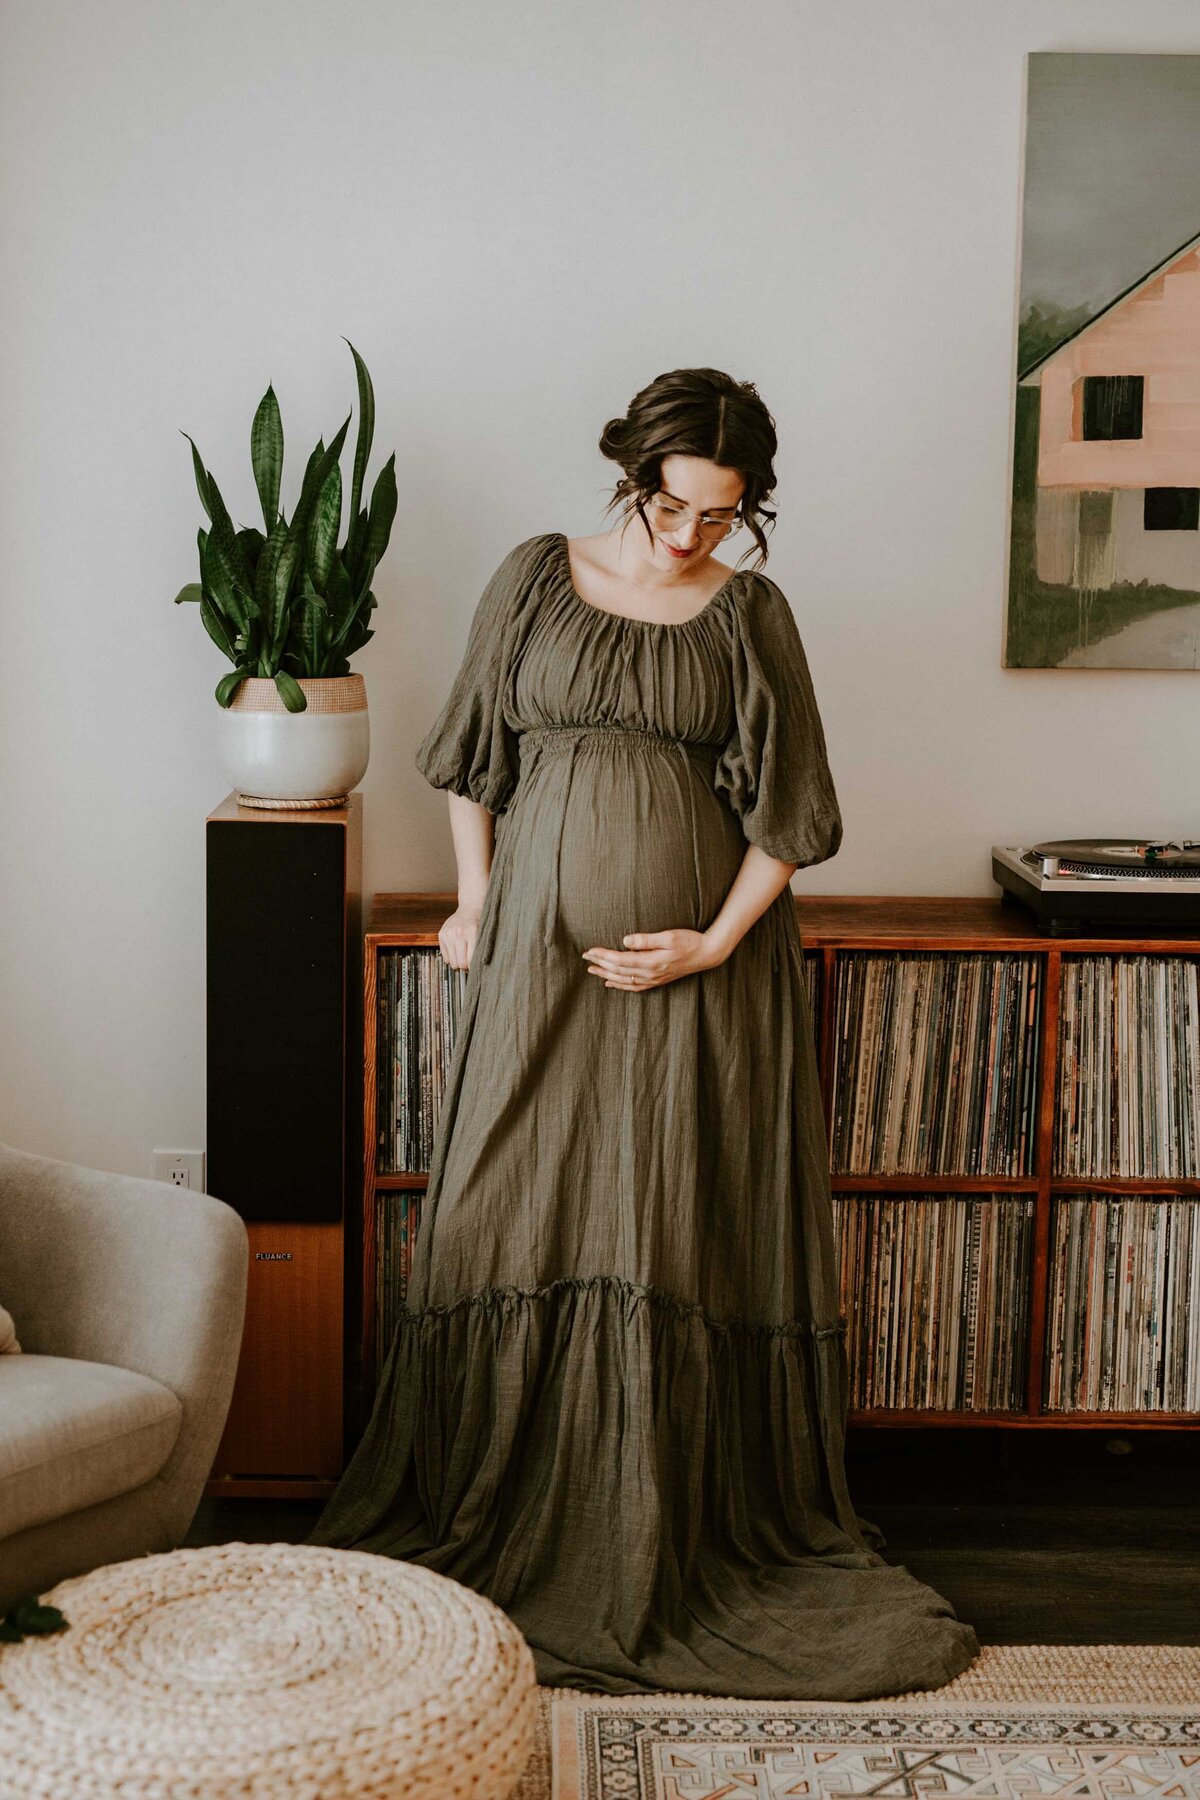 In home lifestyle maternity session. Expectant mom in long green maternity gown is looking at and touching her baby bump while leaning against shelves that house a large record collection.